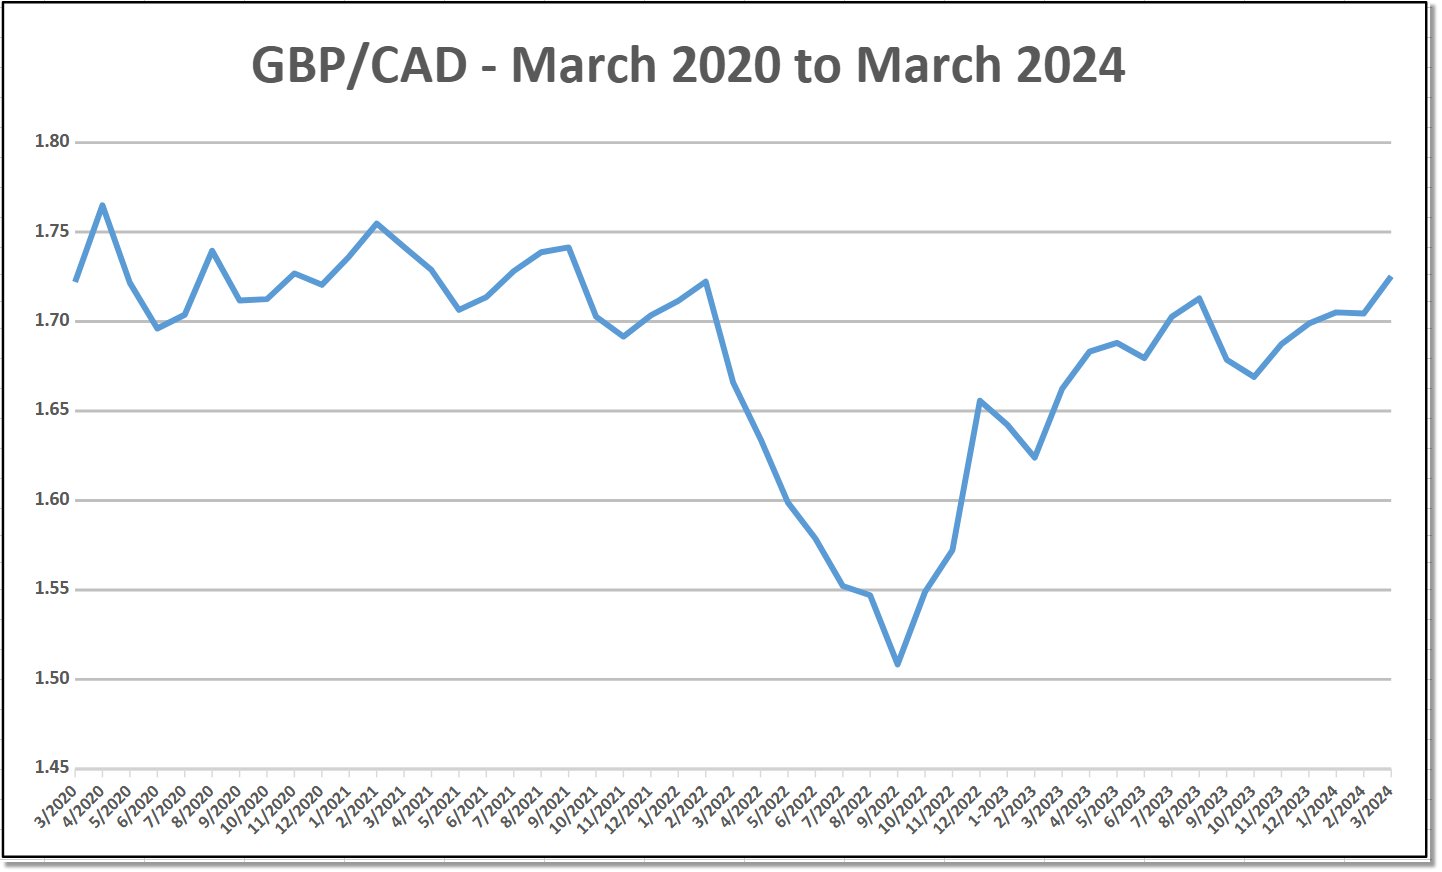 GBP timing considerations when converting to Canadian dollars